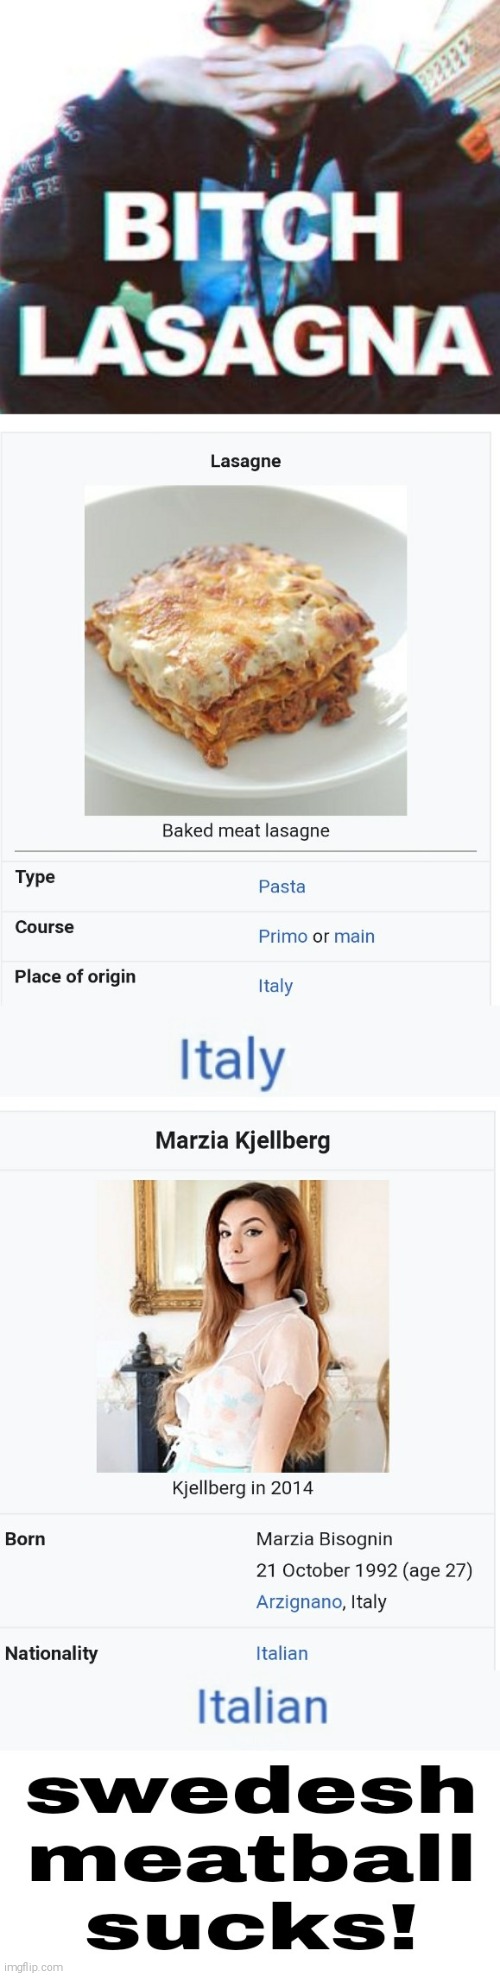 That Bitch Lasanga Is Made By Italy | image tagged in memes,funny,pewdiepie,italy,wikipedia | made w/ Imgflip meme maker